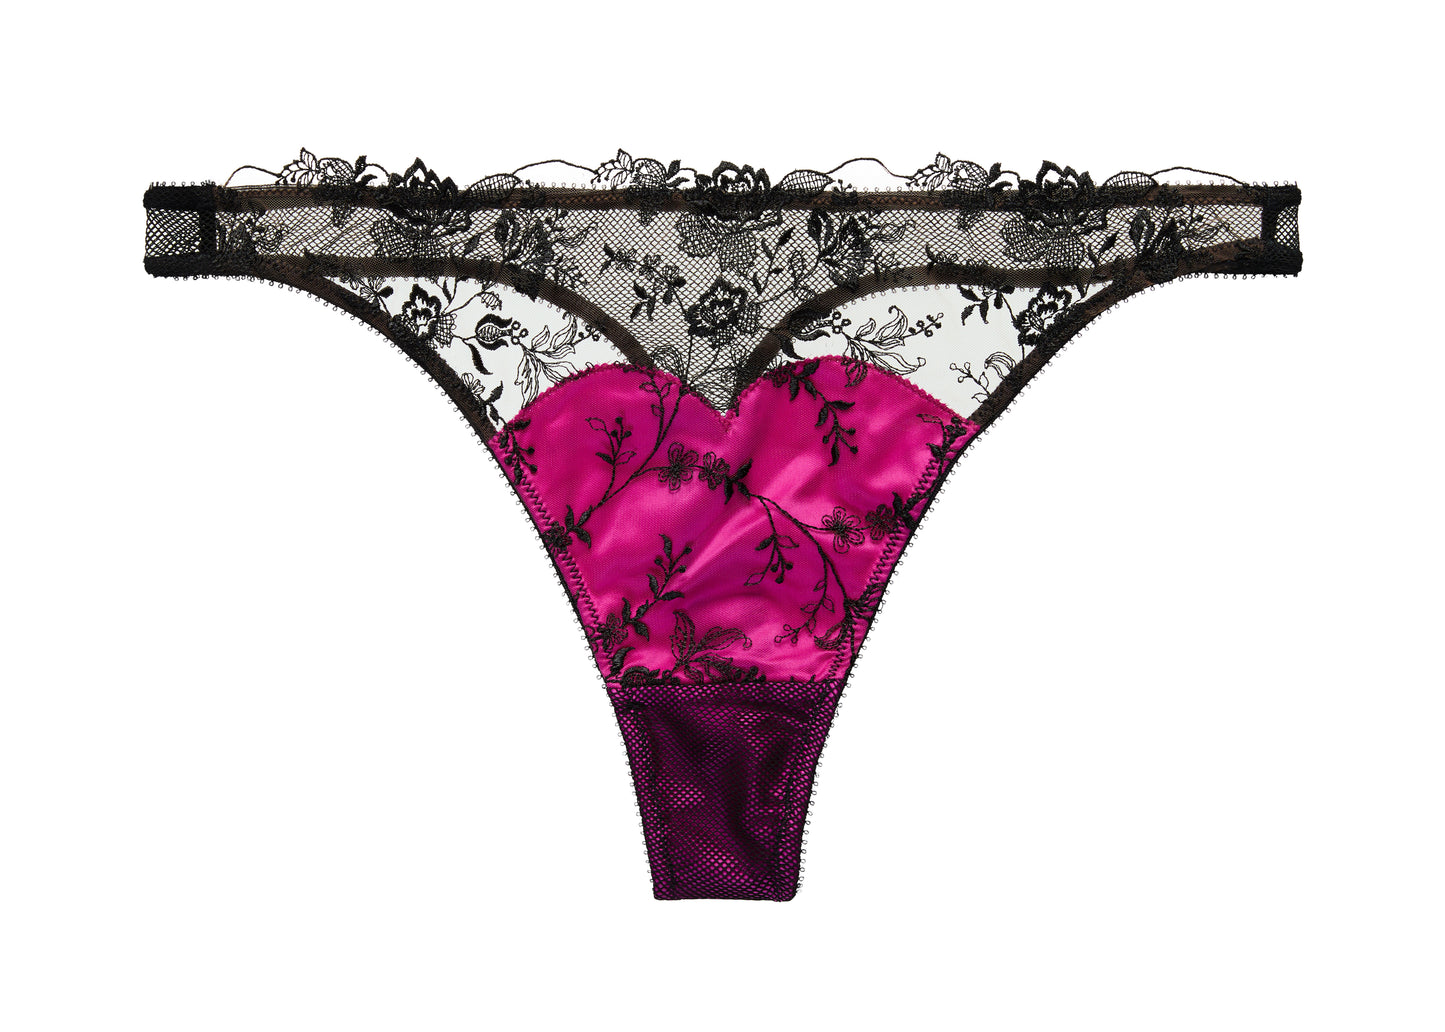 Victress in Fuchsia Thong By Dita Von Teese Lingerie - sizes XS-XL